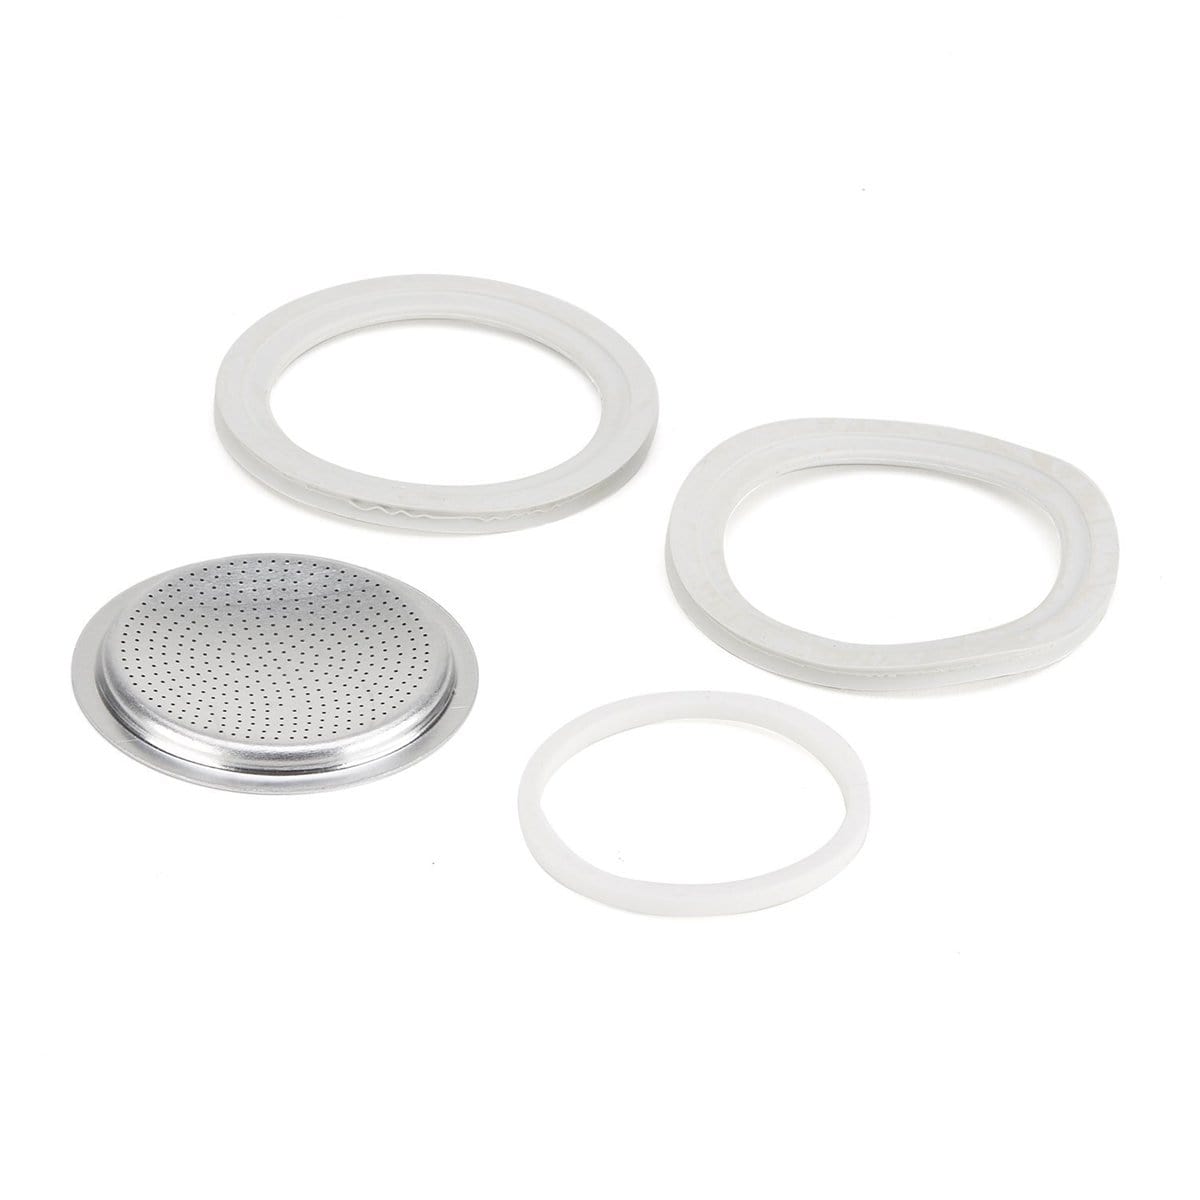 https://cdn.shopify.com/s/files/1/0474/2338/9856/products/bialetti-bialetti-6-cup-replacement-gaskets-and-filter-8006363010412-19595162517664_1600x.jpg?v=1604146532